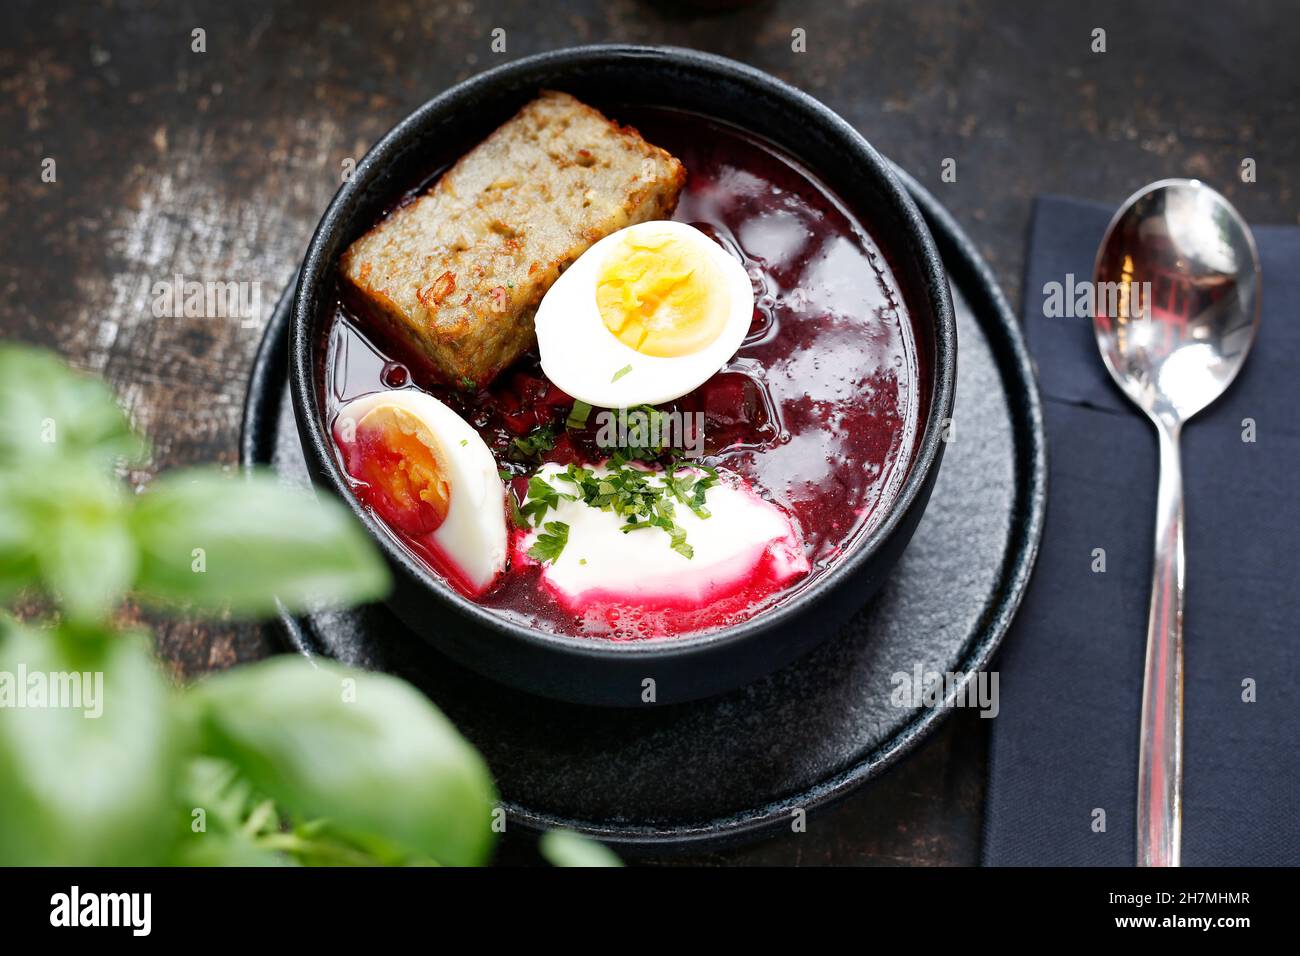 Beet soup with egg. Appetizing dinner dish. Culinary photography, a proposal to serve a meal. Stock Photo